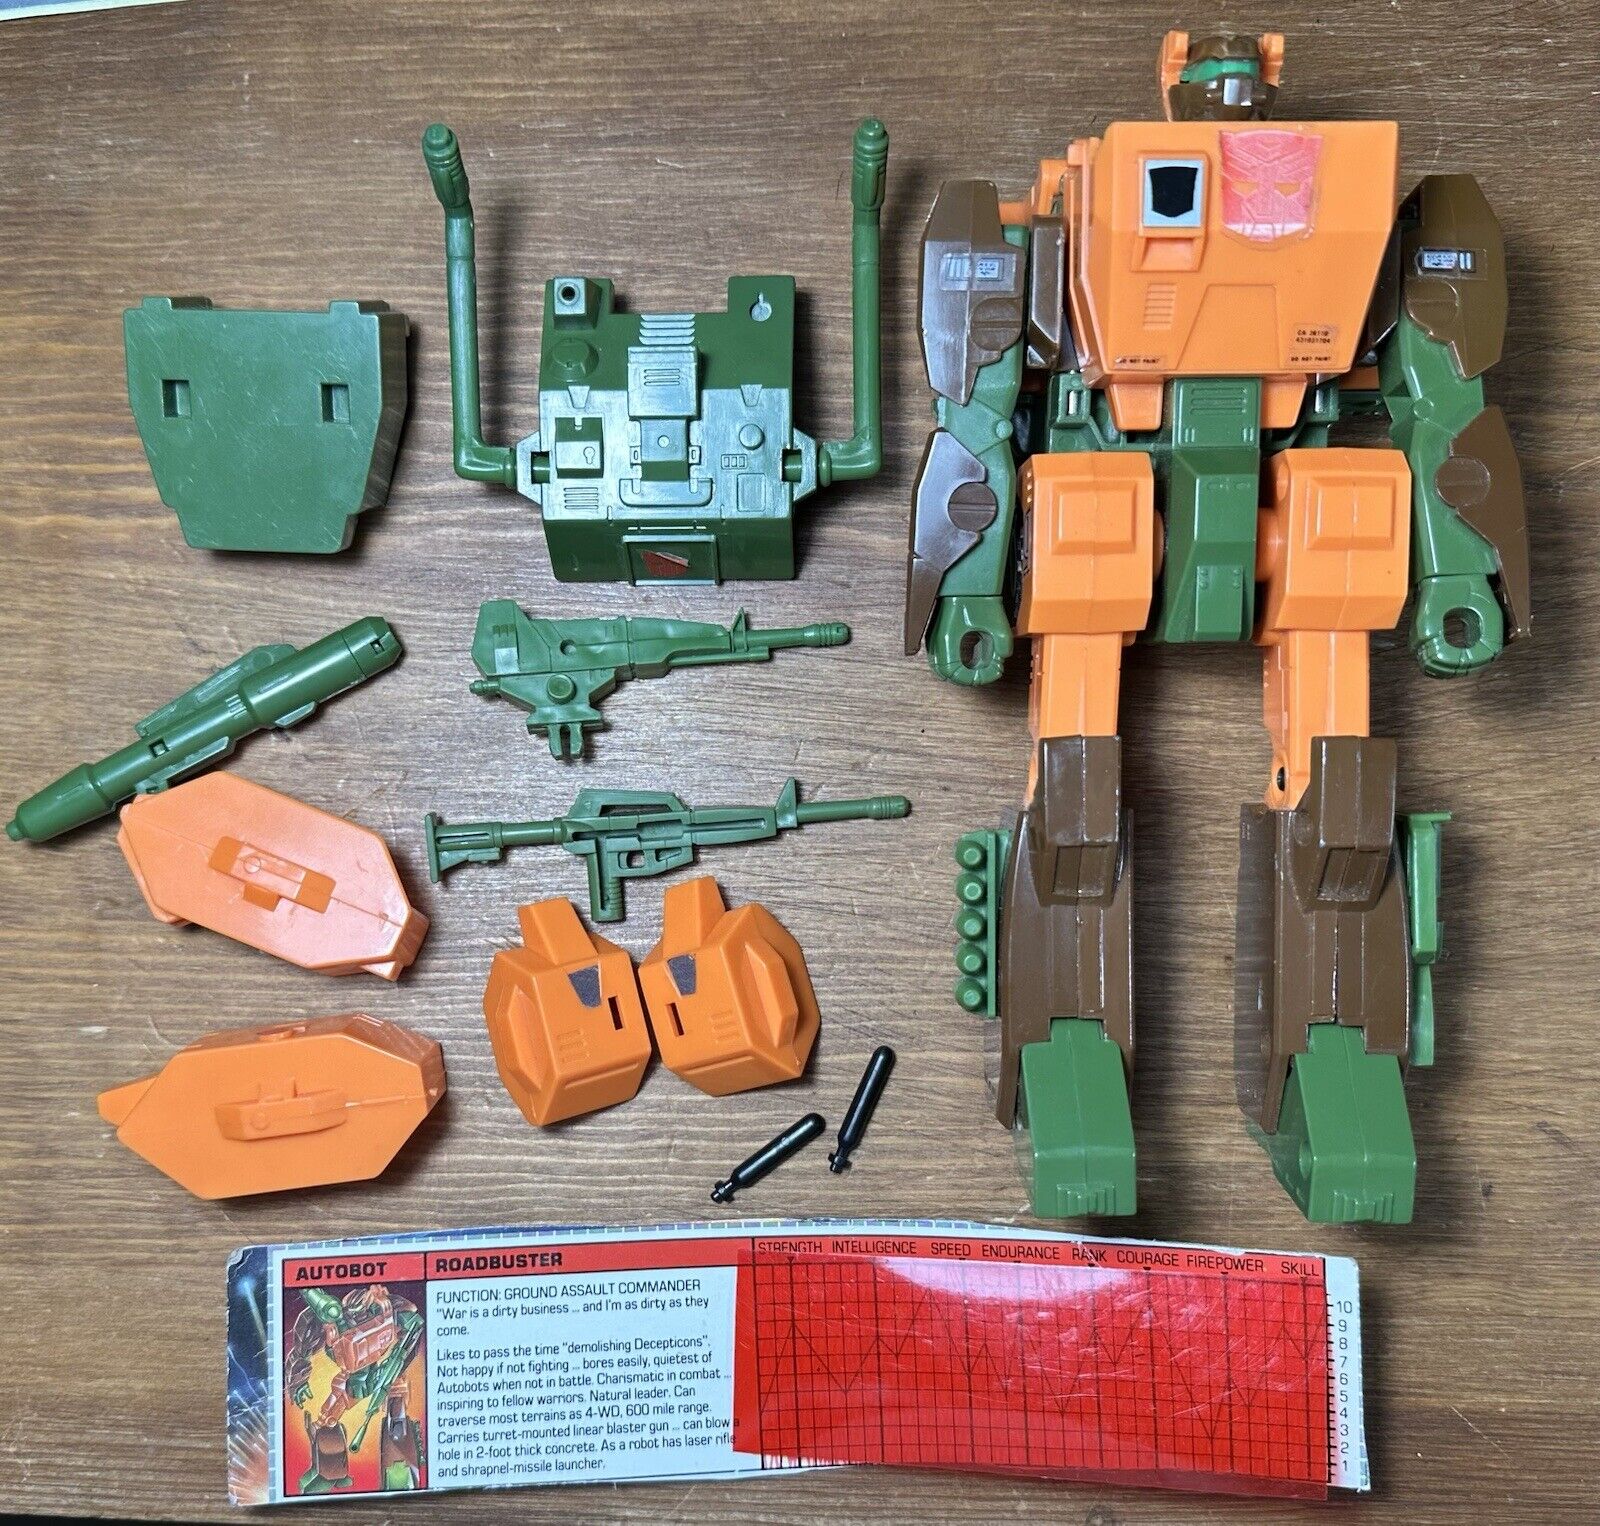 Roadbuster Deluxe 1985 G1 Transformers Vintage Action Figure Near Complete